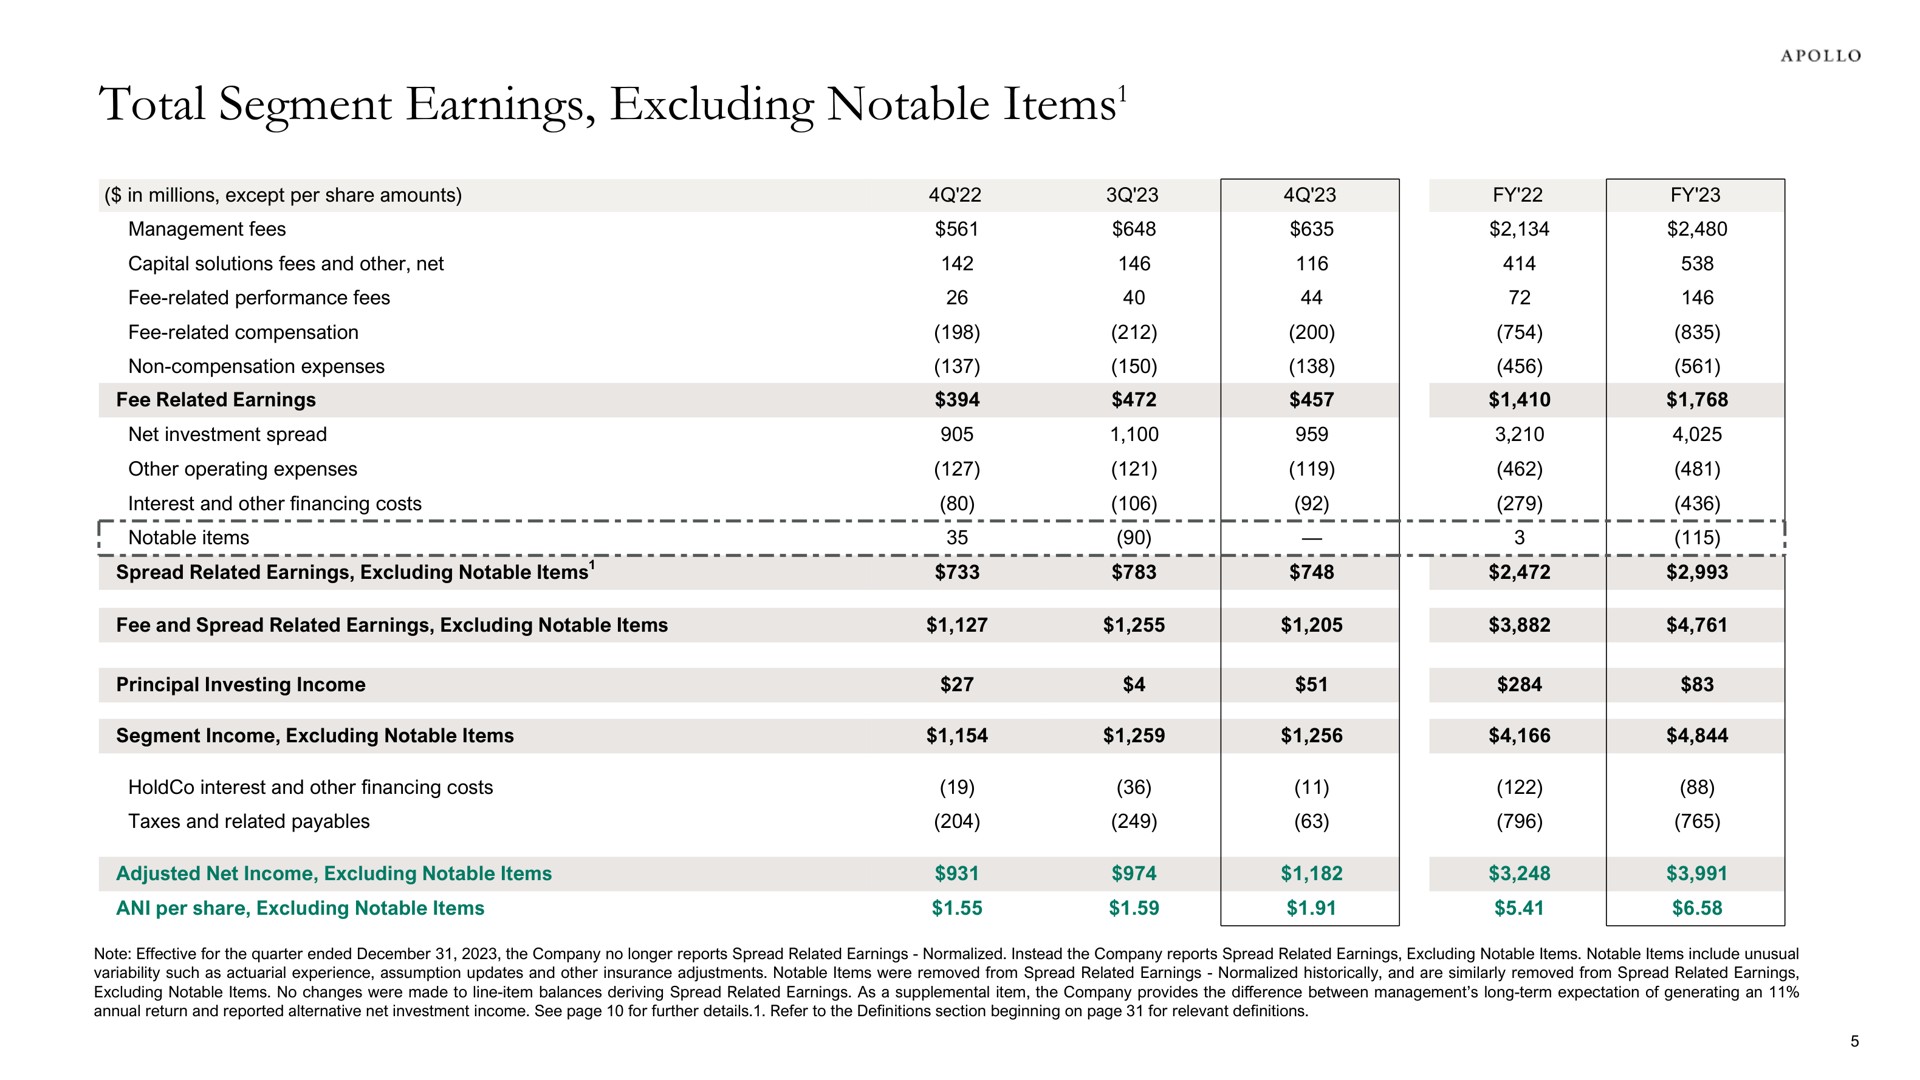 total segment earnings excluding notable items items items | Apollo Global Management